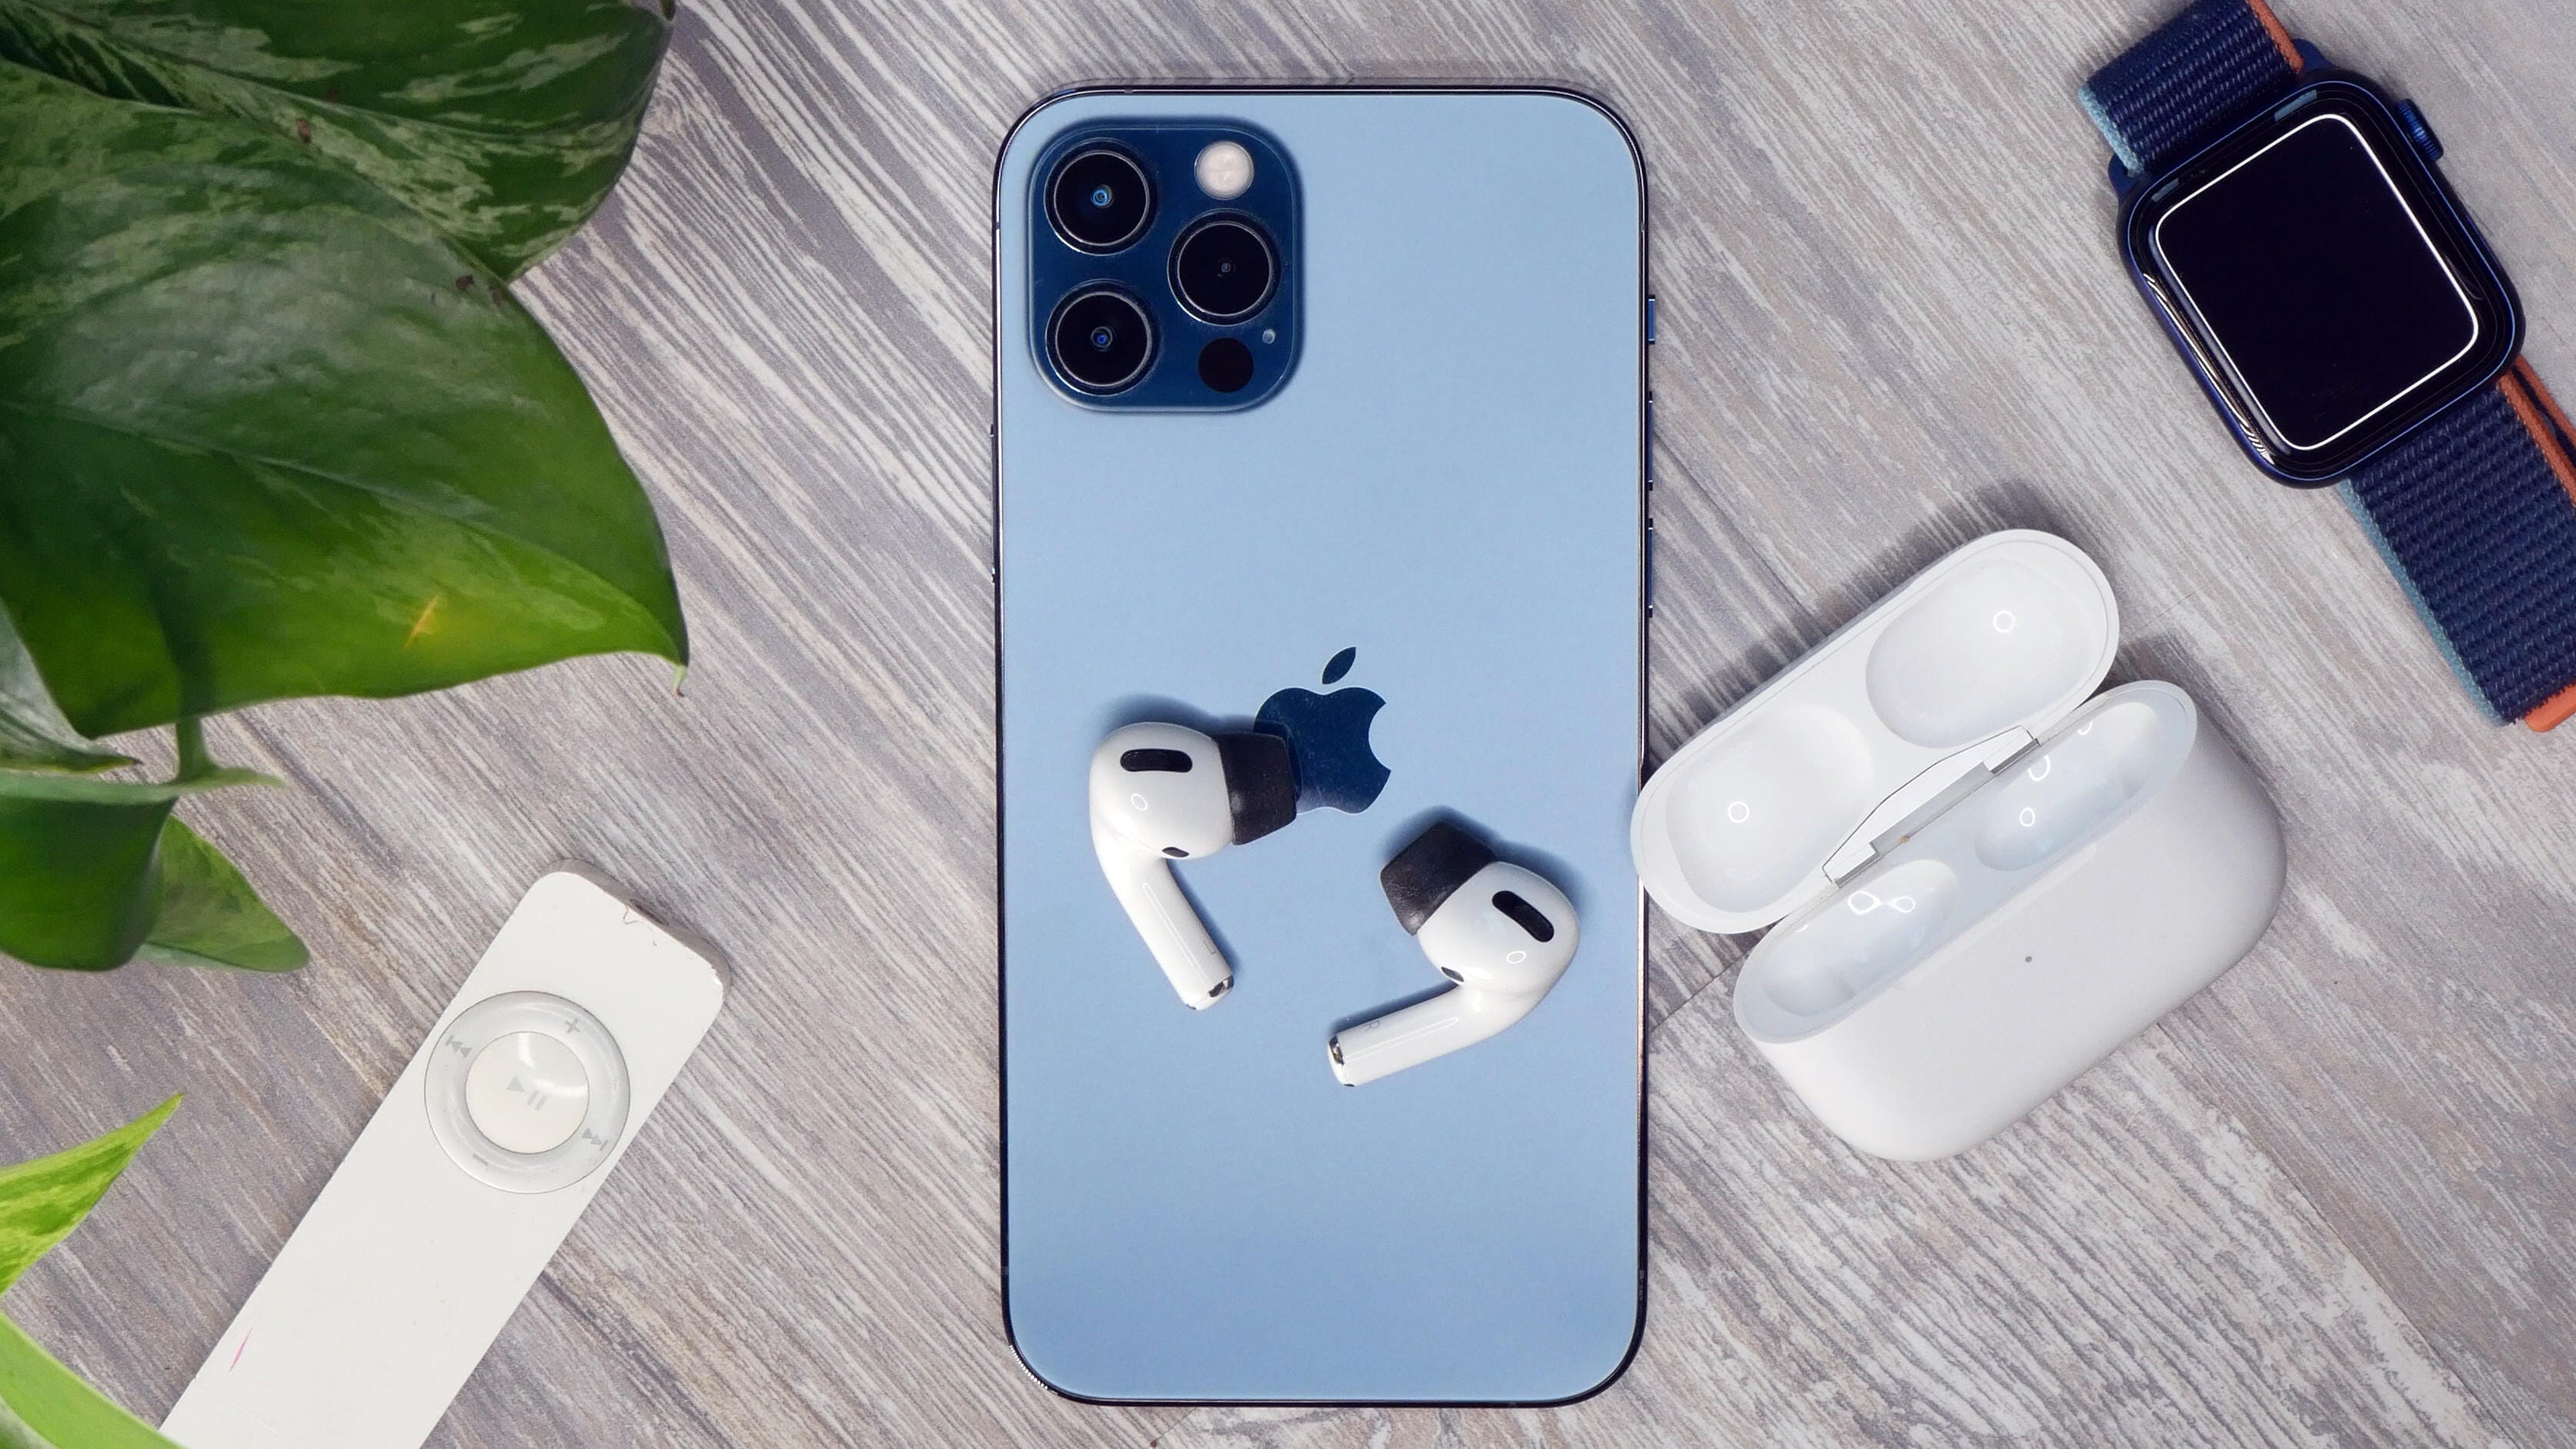 Pair your AirPods to an iPhone, MacBook and more (it’s easier than you think)